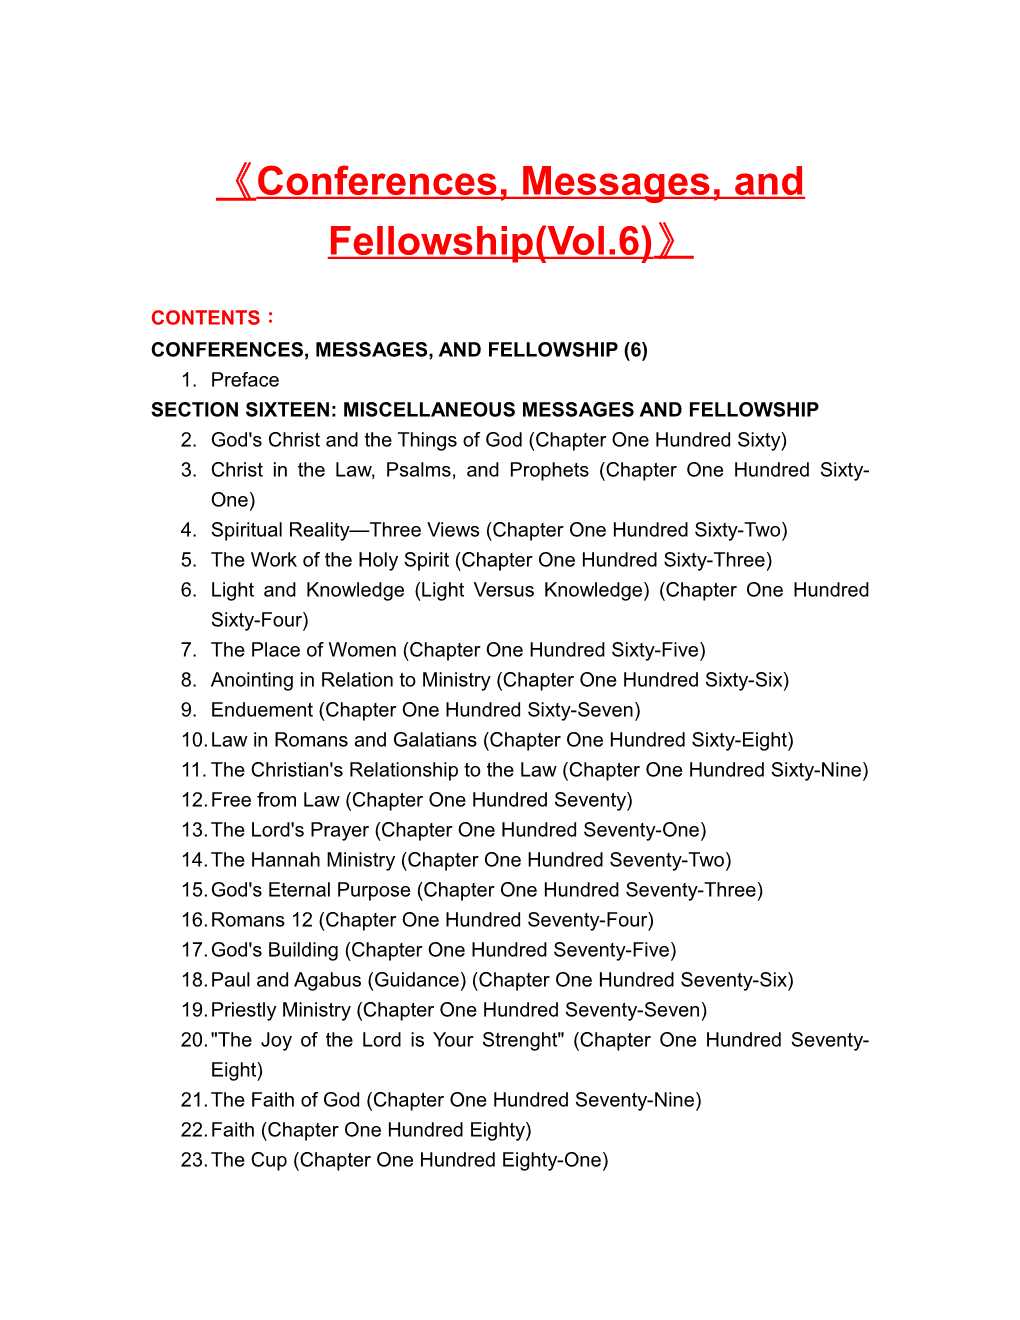 Conferences, Messages, and Fellowship(Vol.6)